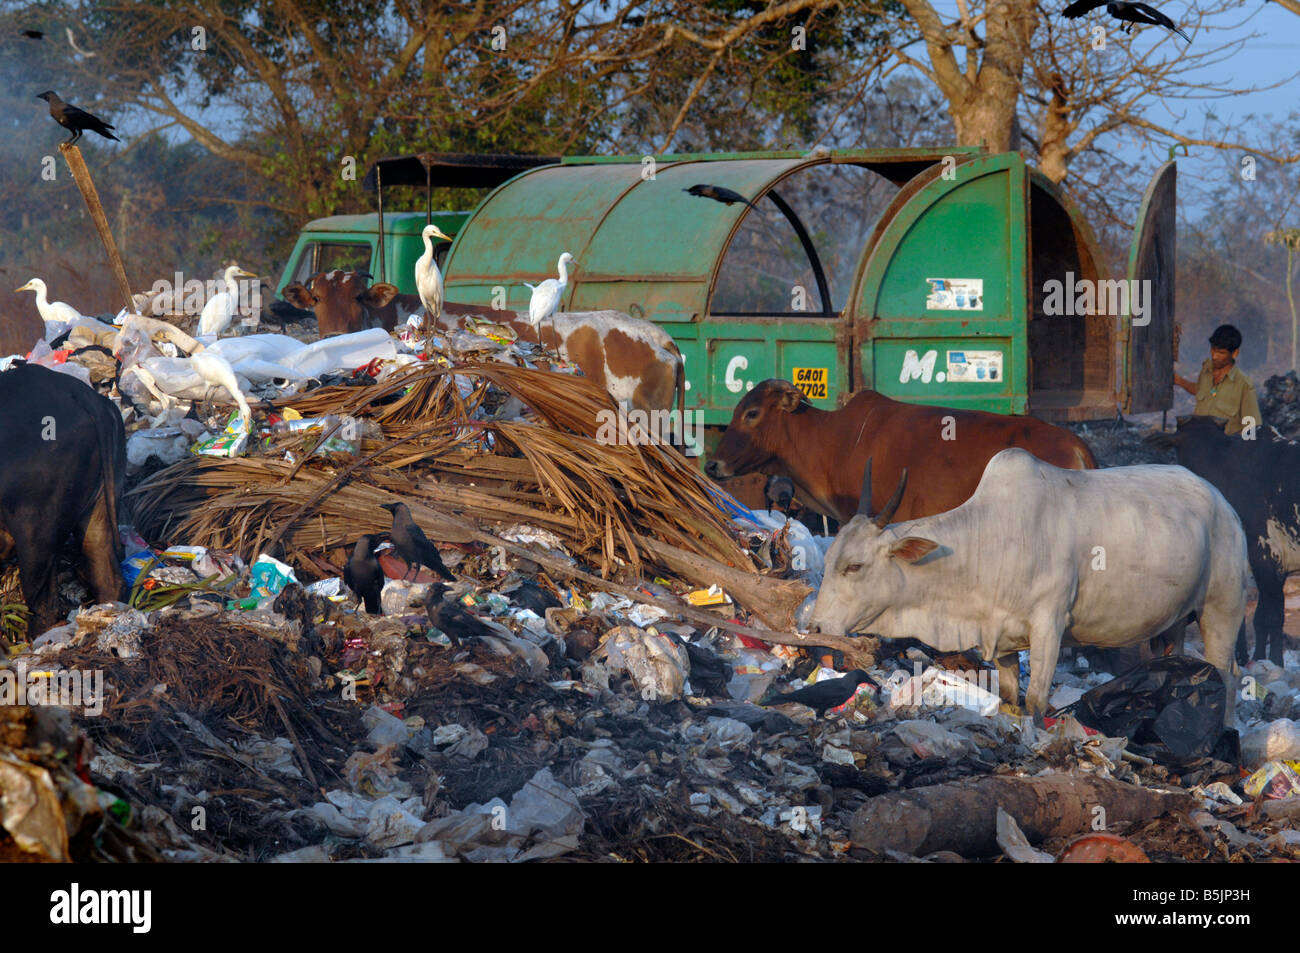 Rubbish is burnt on a dump near the town of Mapusa North Goa India, Cows, birds and people scavenge Stock Photo